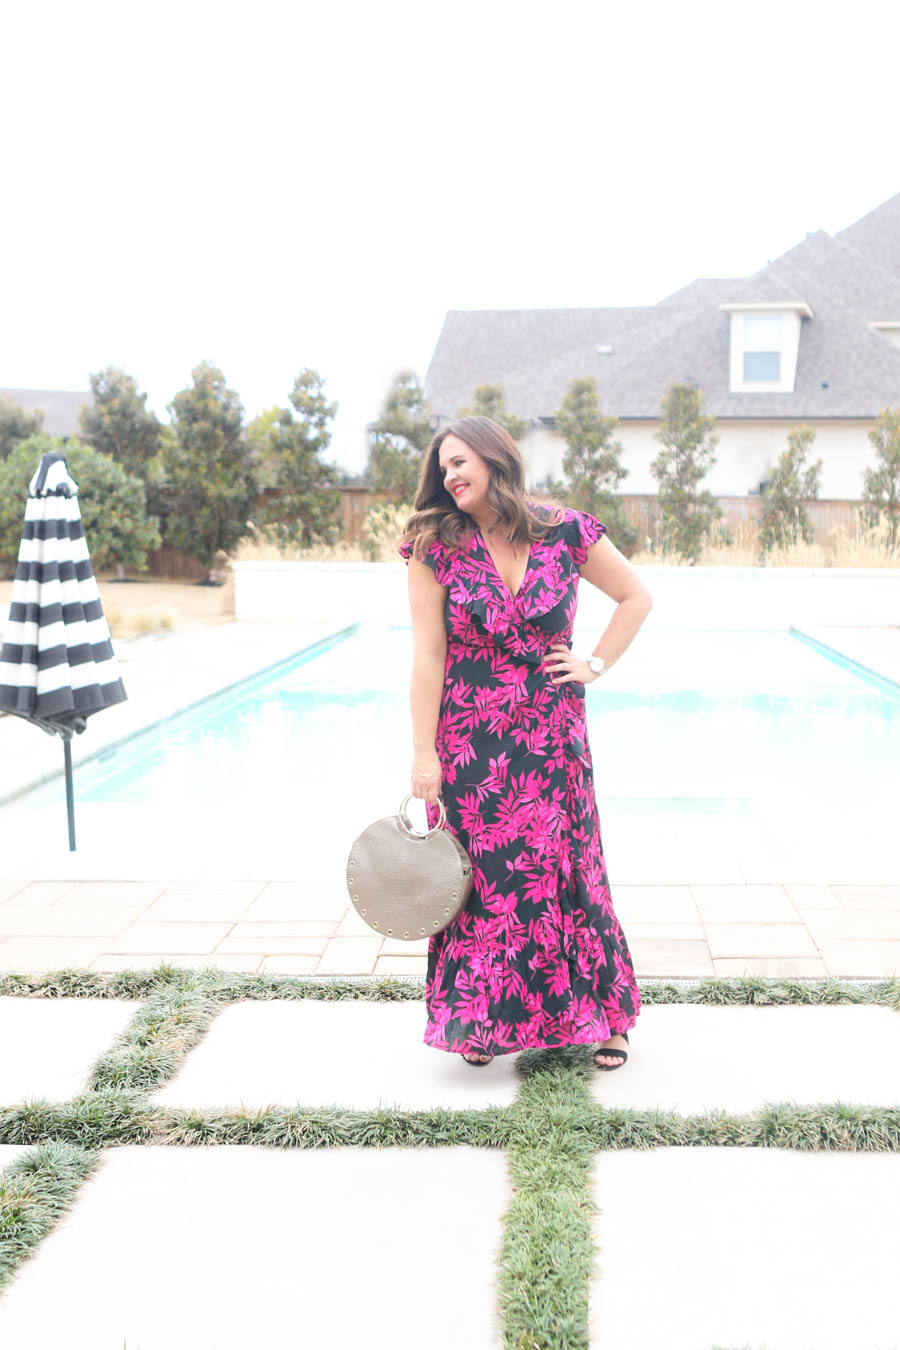 15 Must Have Walmart Fashion Items for Spring Carissa Miller standing by a rectangular pool with hot tub and black and white umbrella in a black and pink palm print wrap dress by Sofia Vergara Walmart